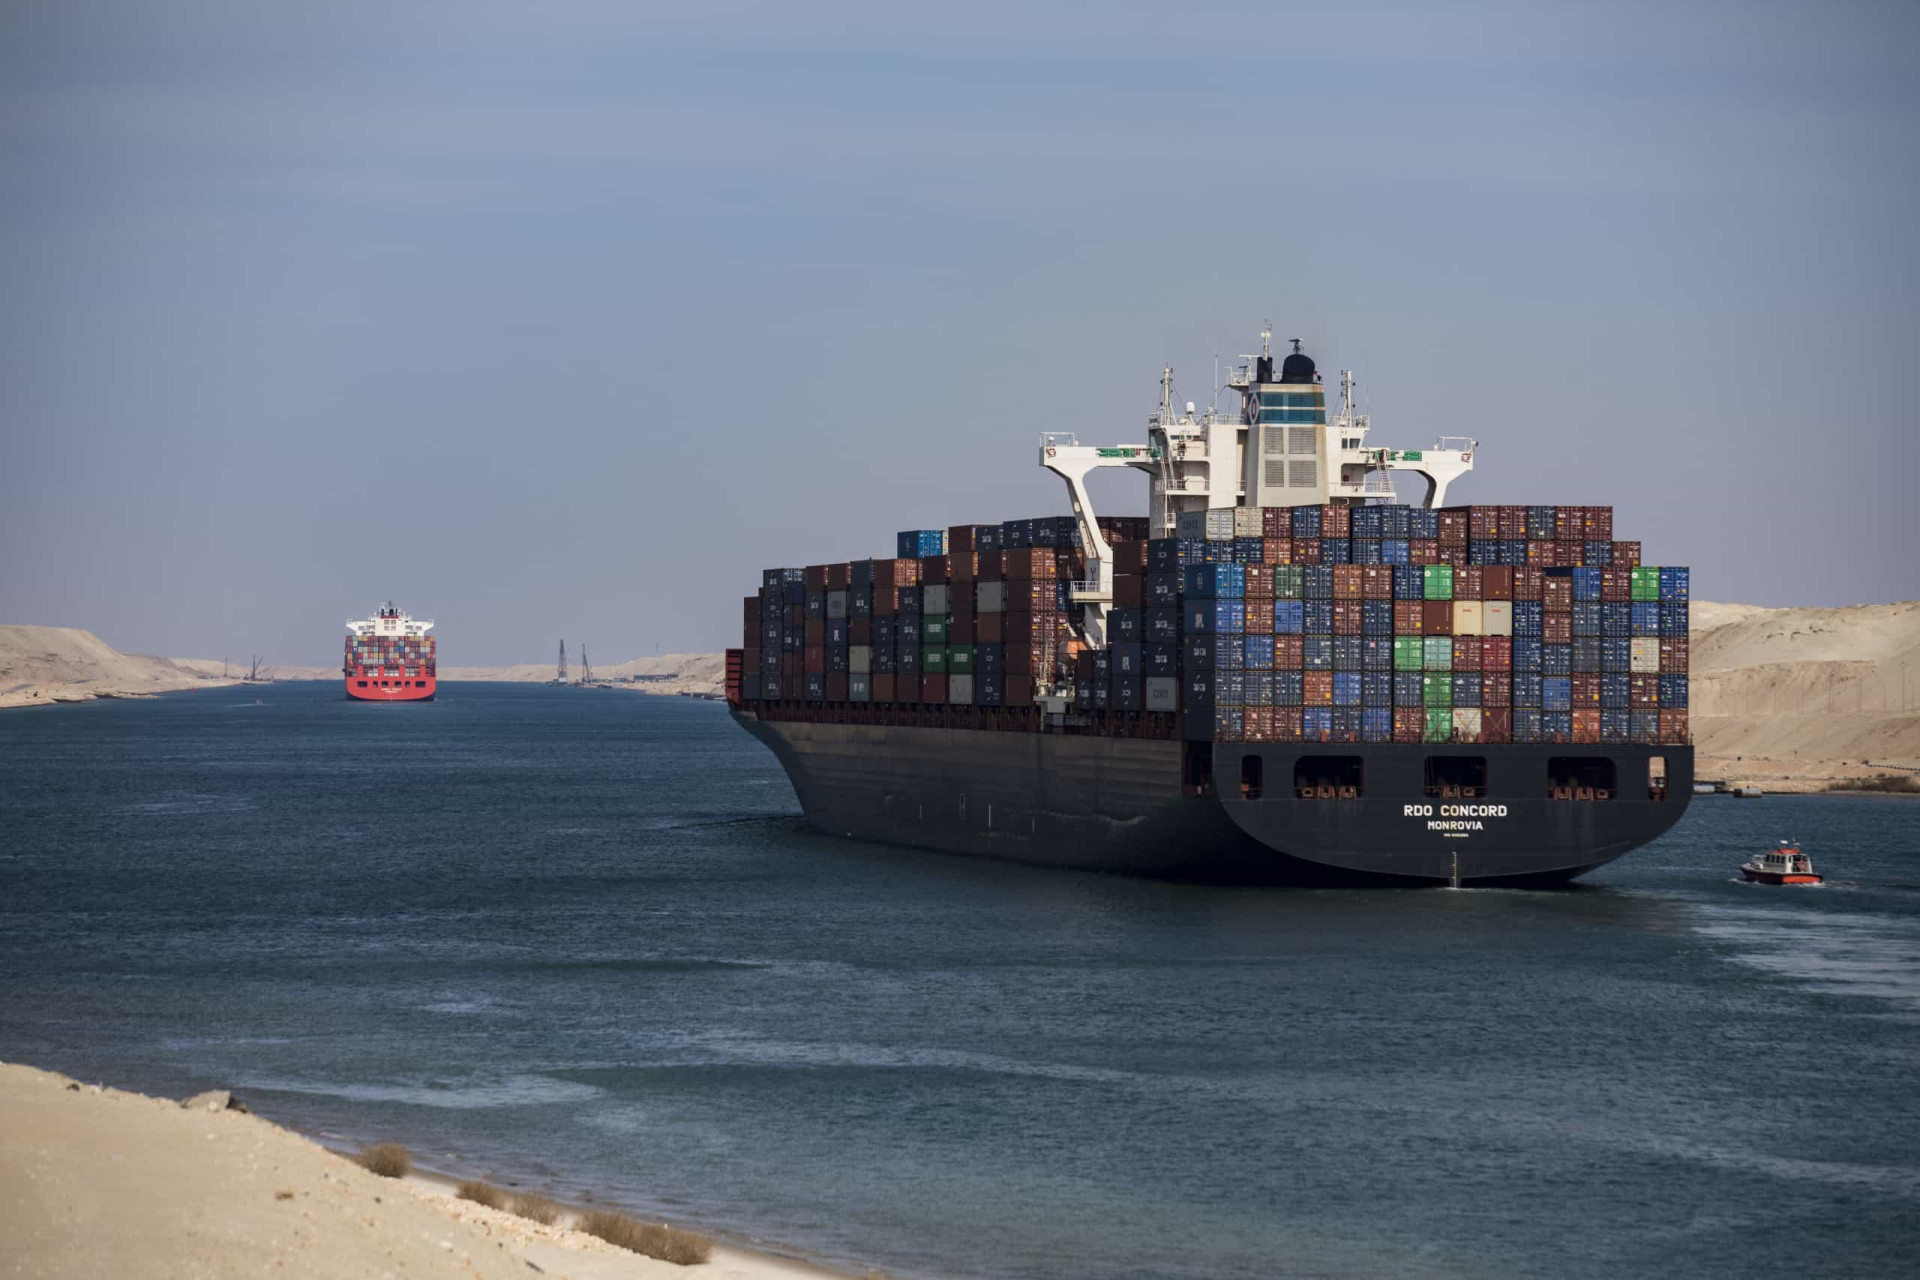 <p>Today an average of 60 ships pass through the Suez Canal every day. Shipping tolls allow Egypt to rake in around US$5 billion annually.</p><p>You may also like:<a href="https://www.starsinsider.com/n/368021?utm_source=msn.com&utm_medium=display&utm_campaign=referral_description&utm_content=455090v9en-en_selected"> Underexplored places you should definitely visit</a></p>